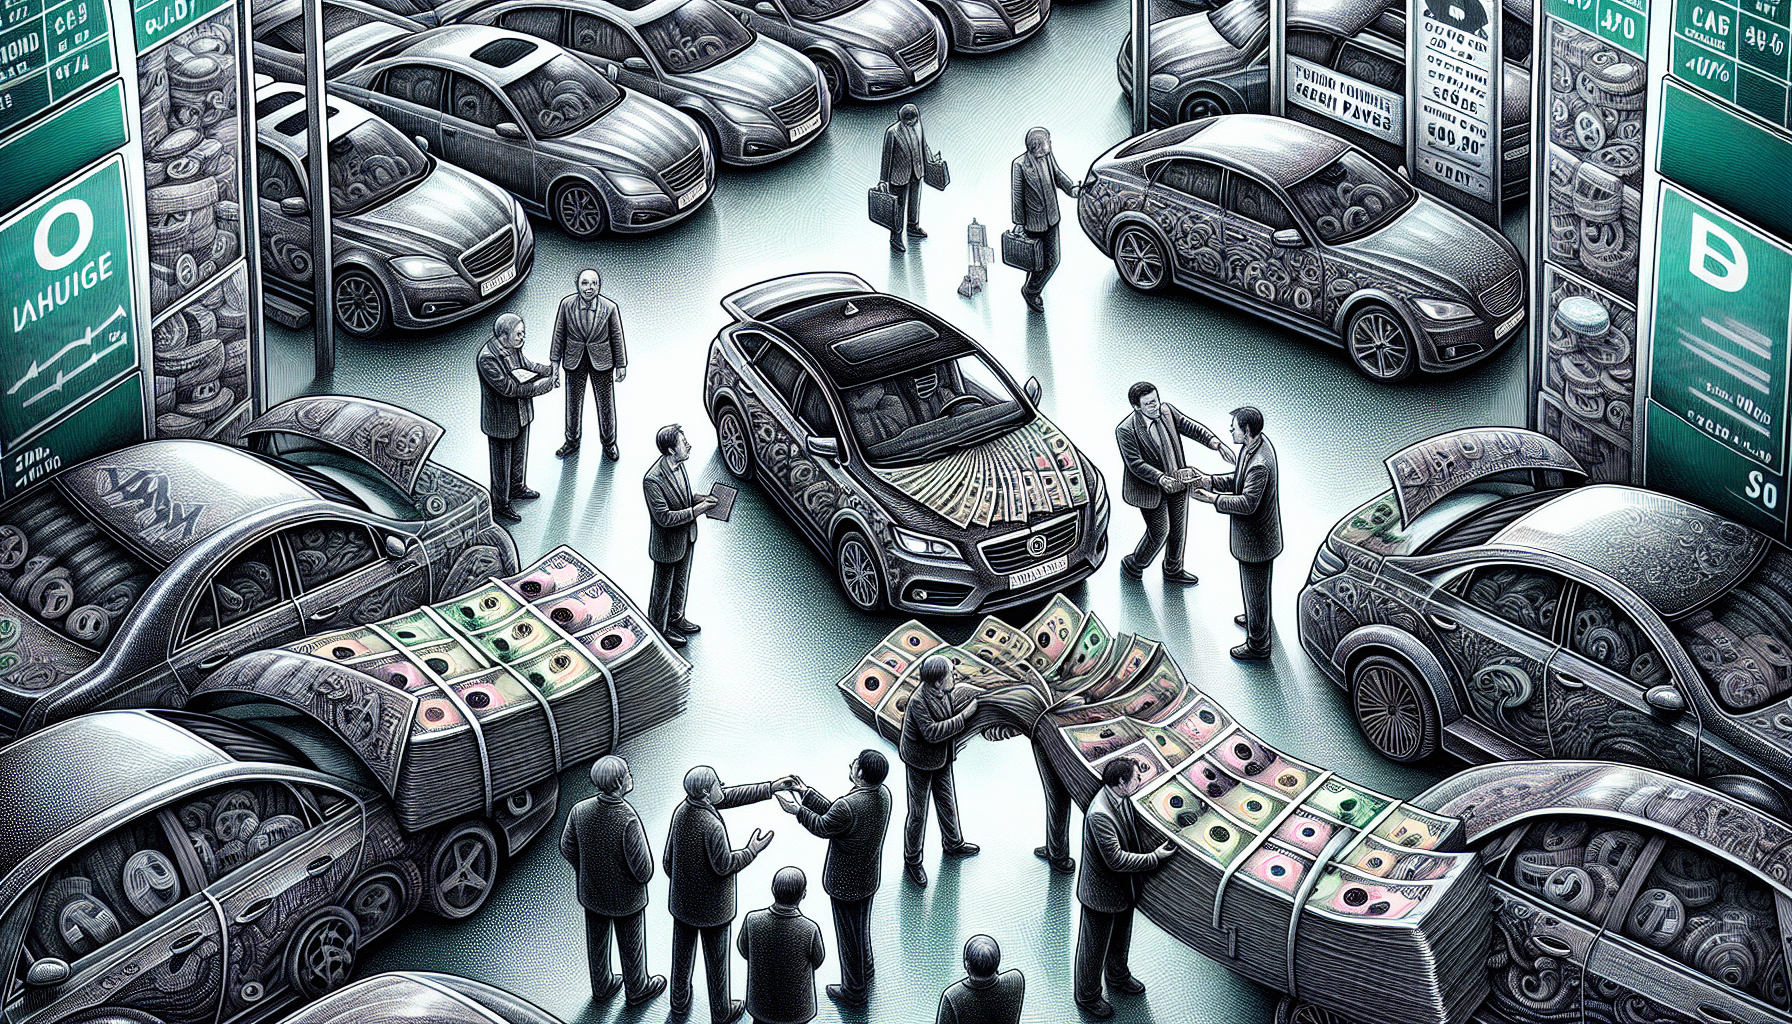 Illustration of economic conditions affecting car purchases